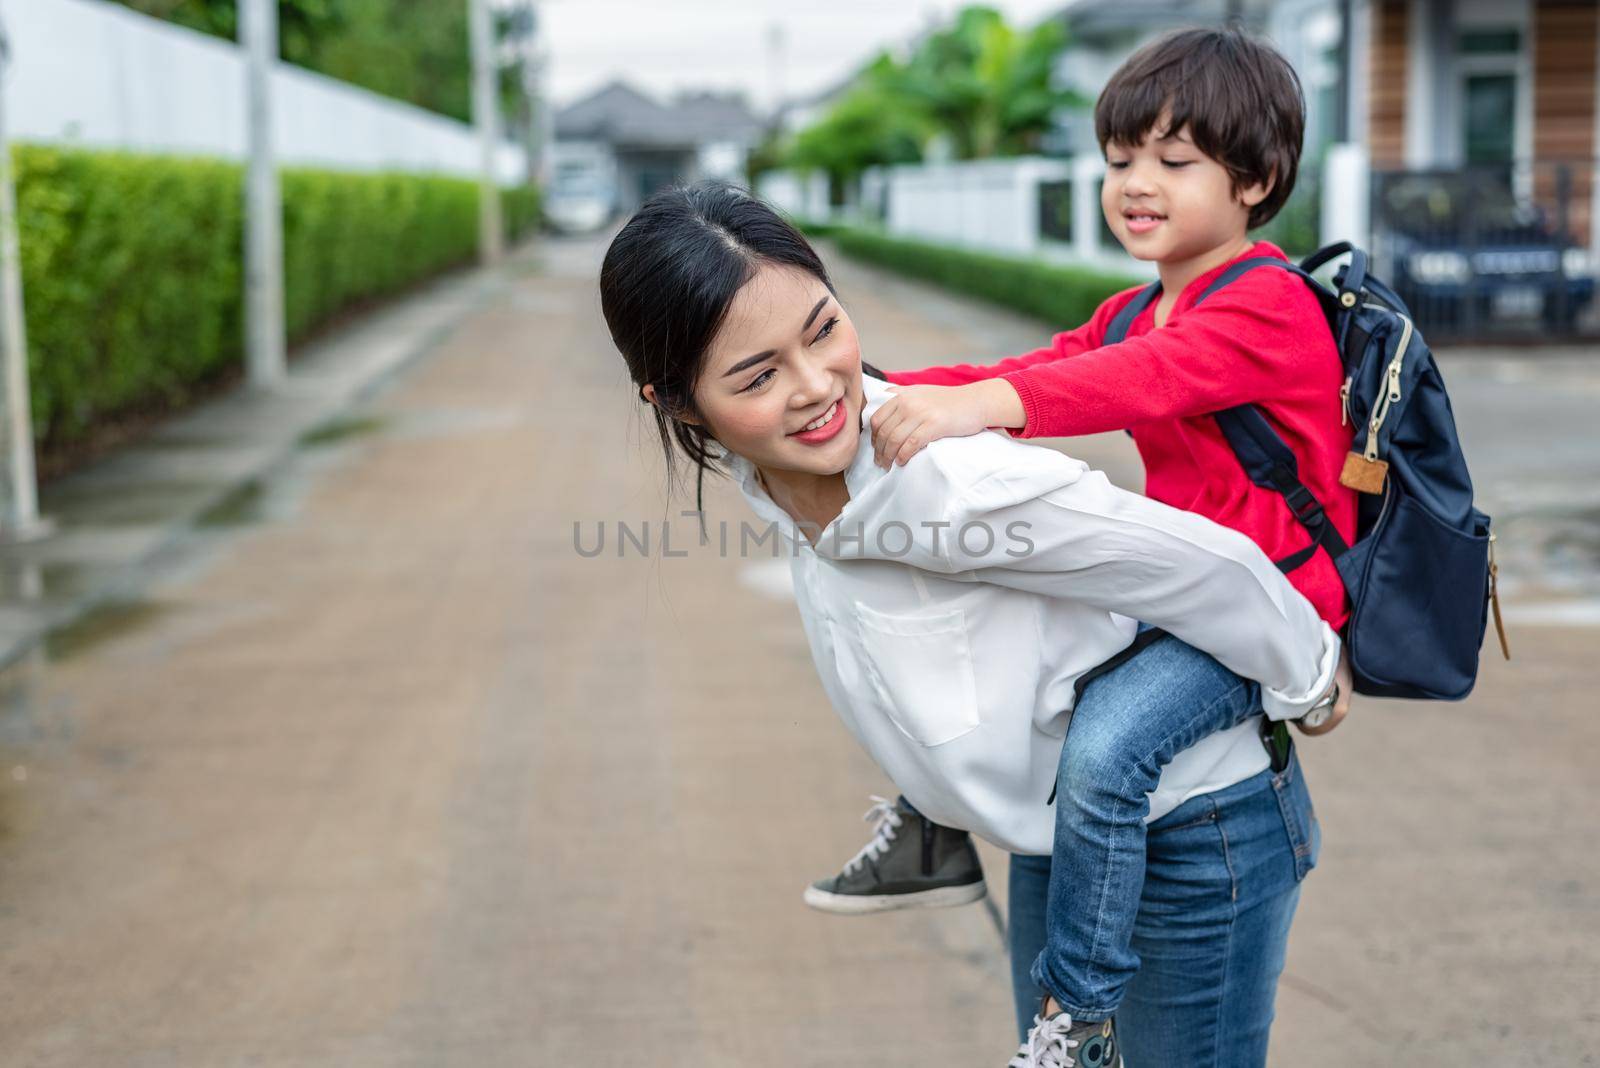 Single mom carrying and playing with her children near home with villa street background. People and Lifestyles concept. Happy family and Home sweet home theme. Outdoors and nature theme. by MiniStocker